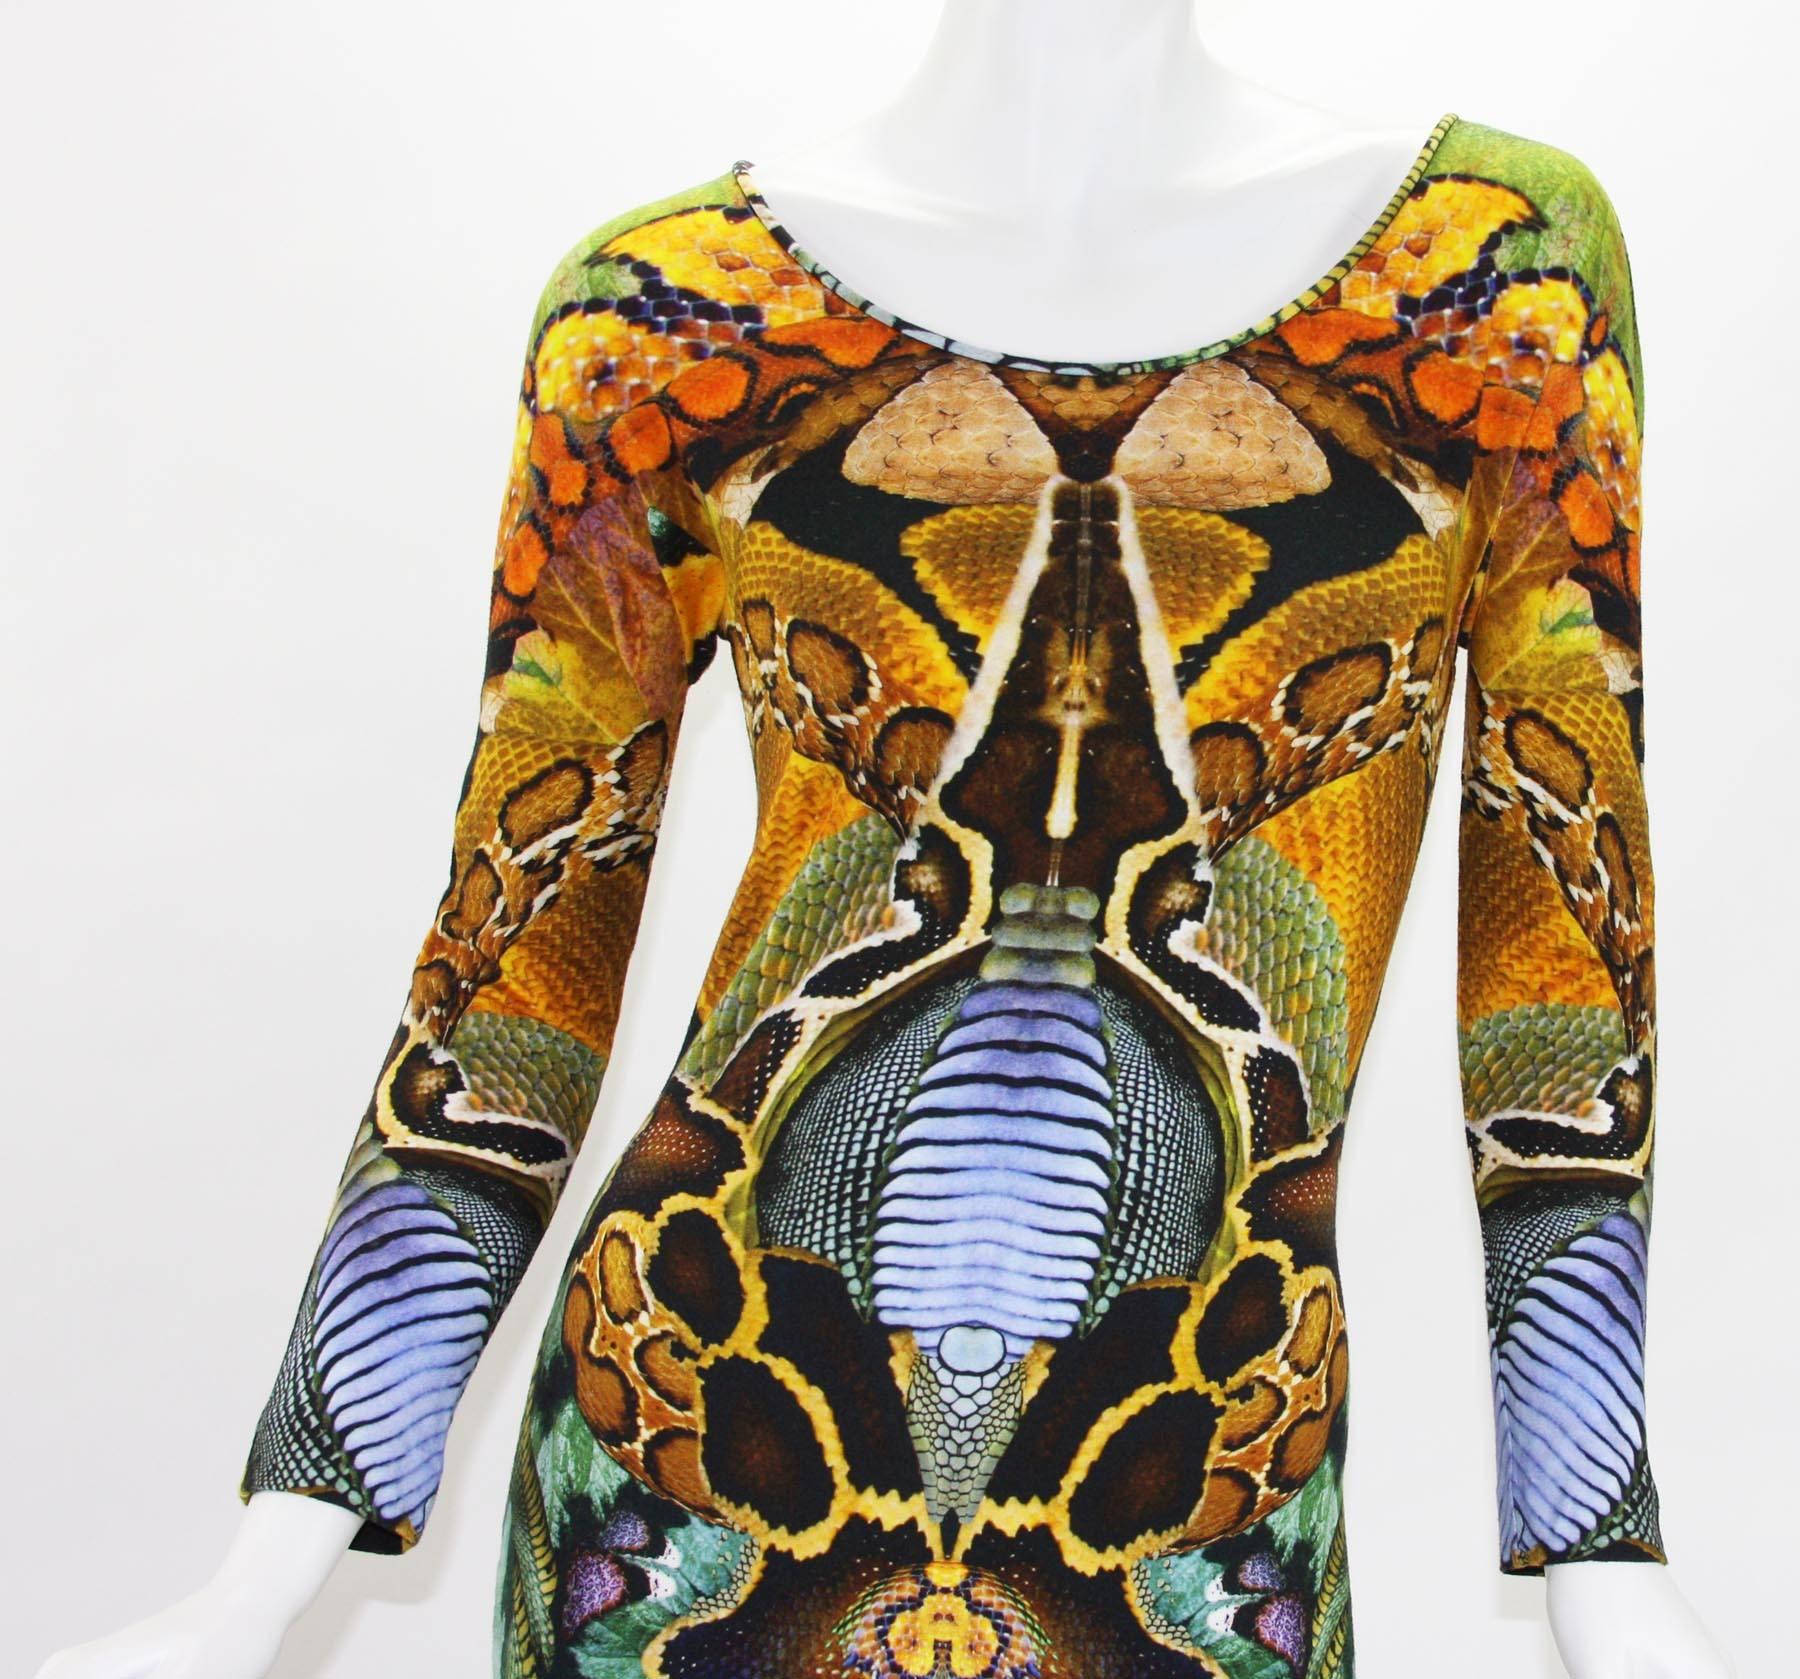 Alexander McQueen S/S 2010 *Plato's Atlantis* Collection Stretch Dress 42 US 6 In New Condition For Sale In Montgomery, TX